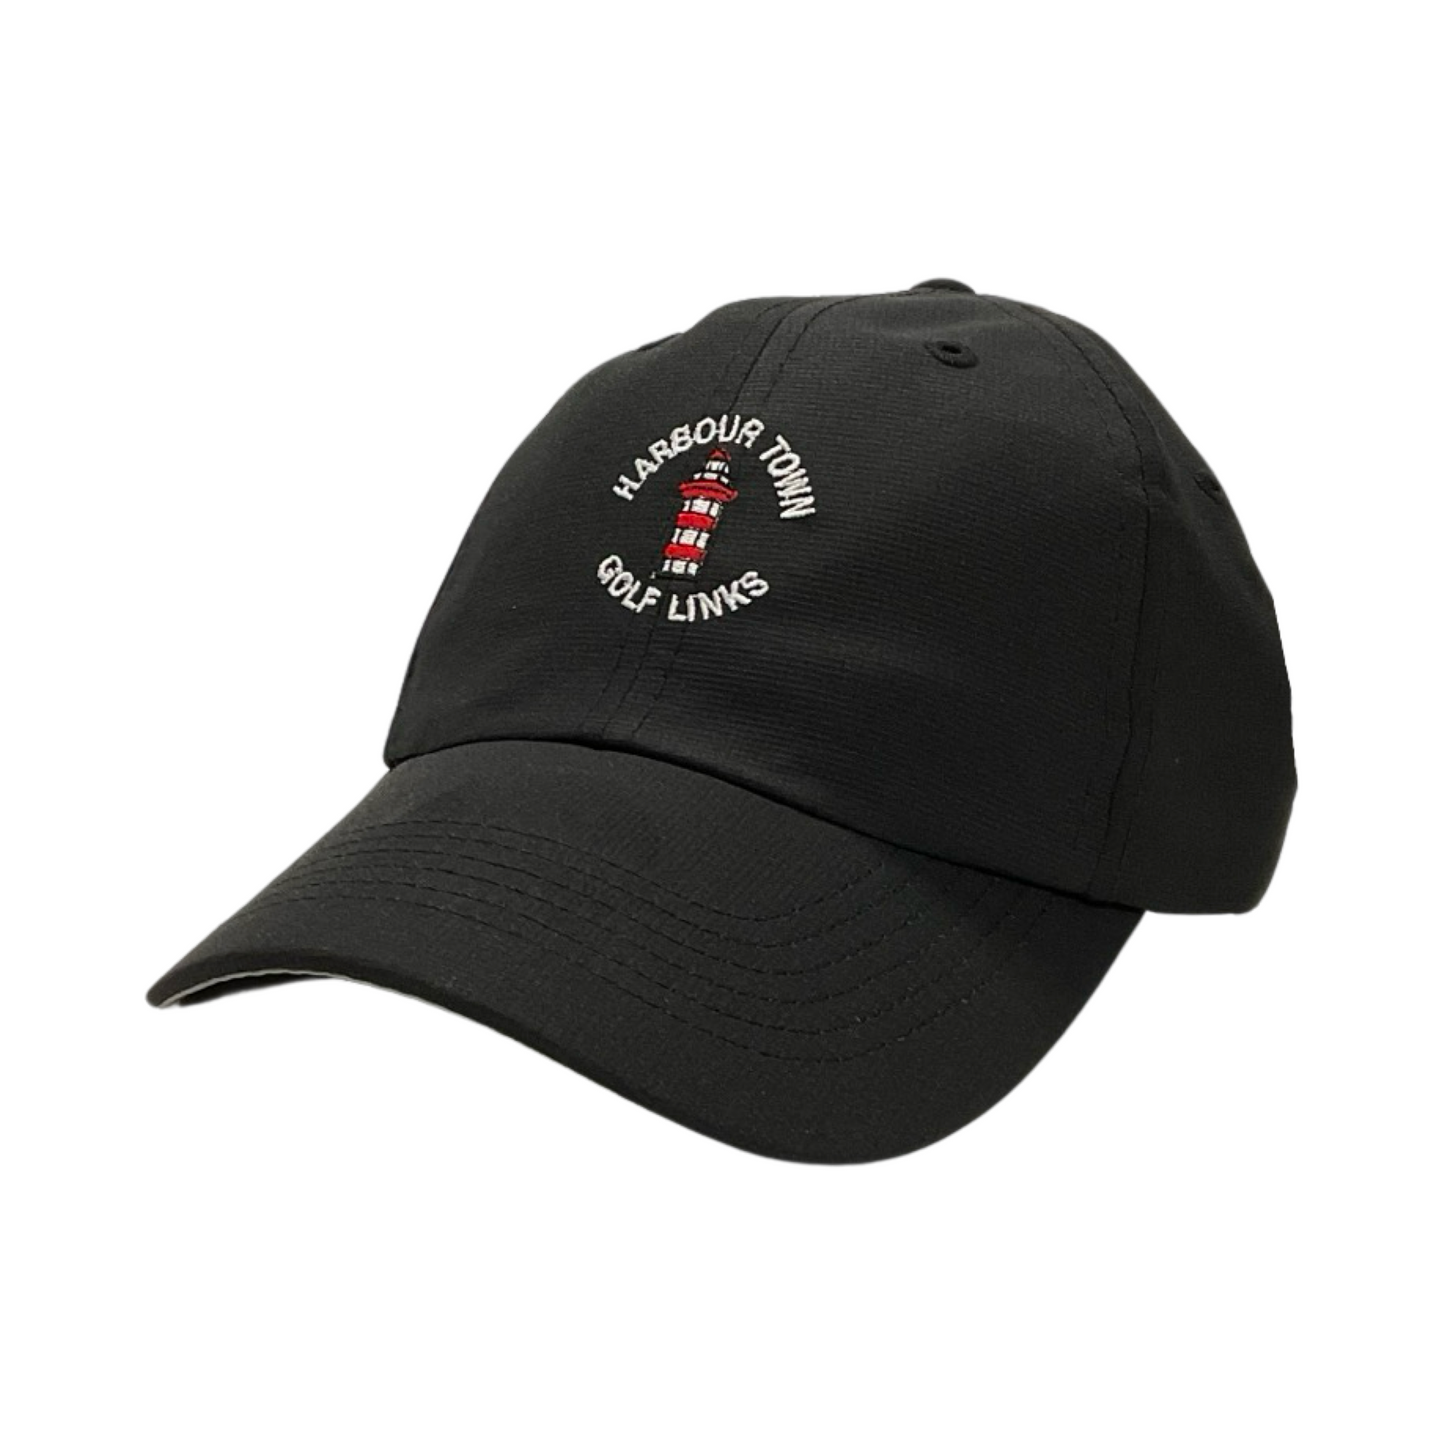 Imperial Lighthouse Cap - Black